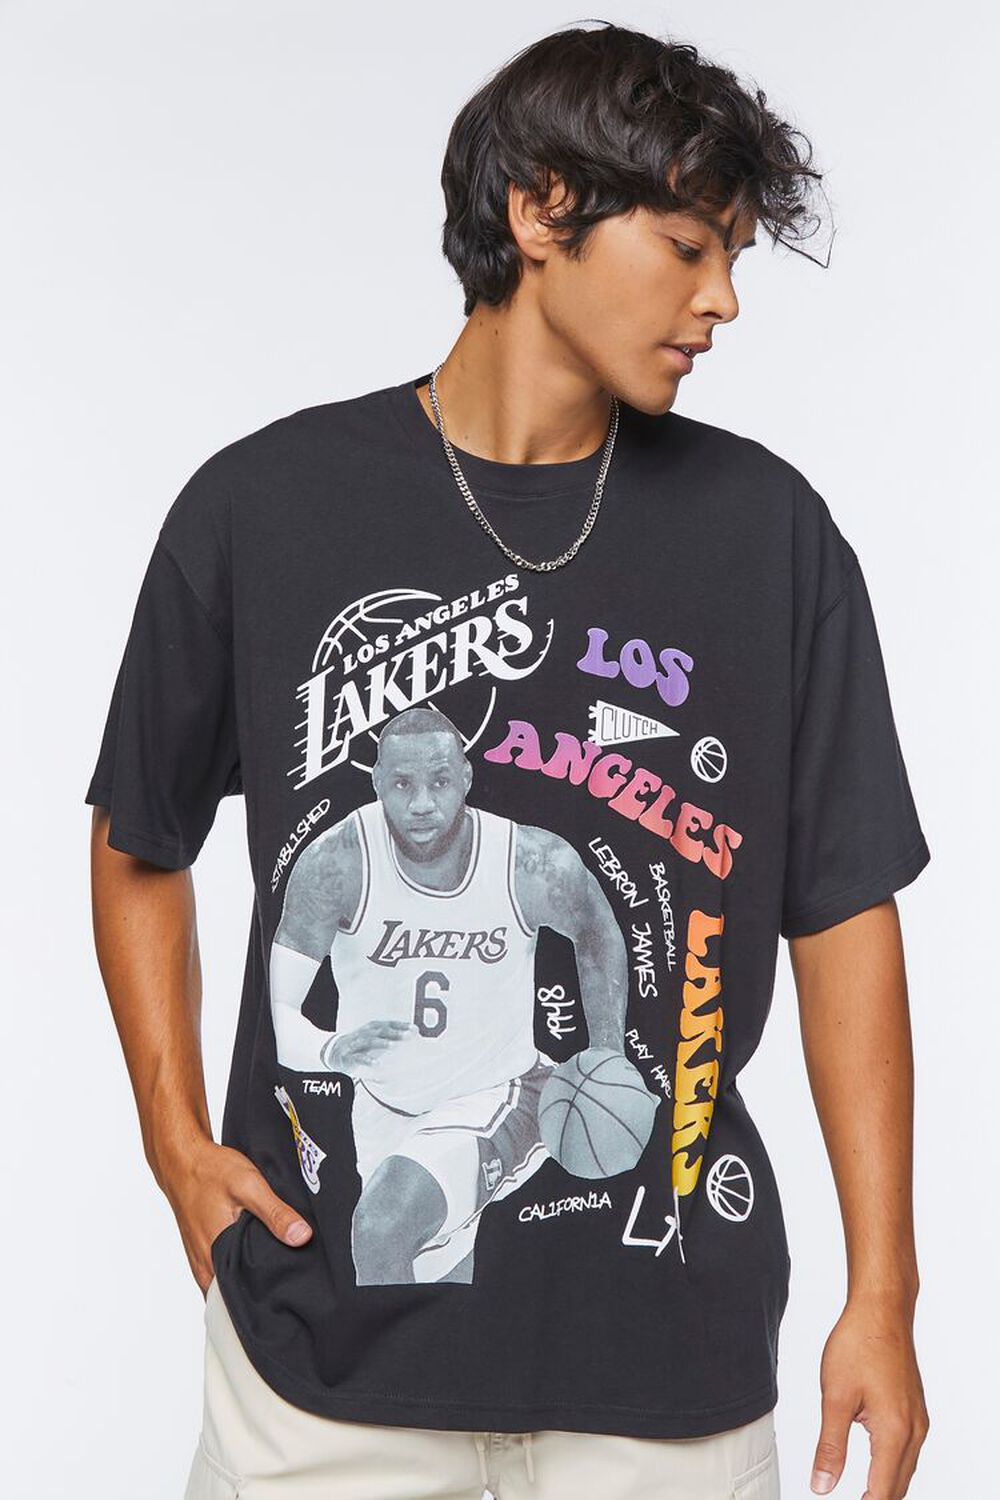 The Best Vintage Graphic T-Shirts of the NBA Bubble